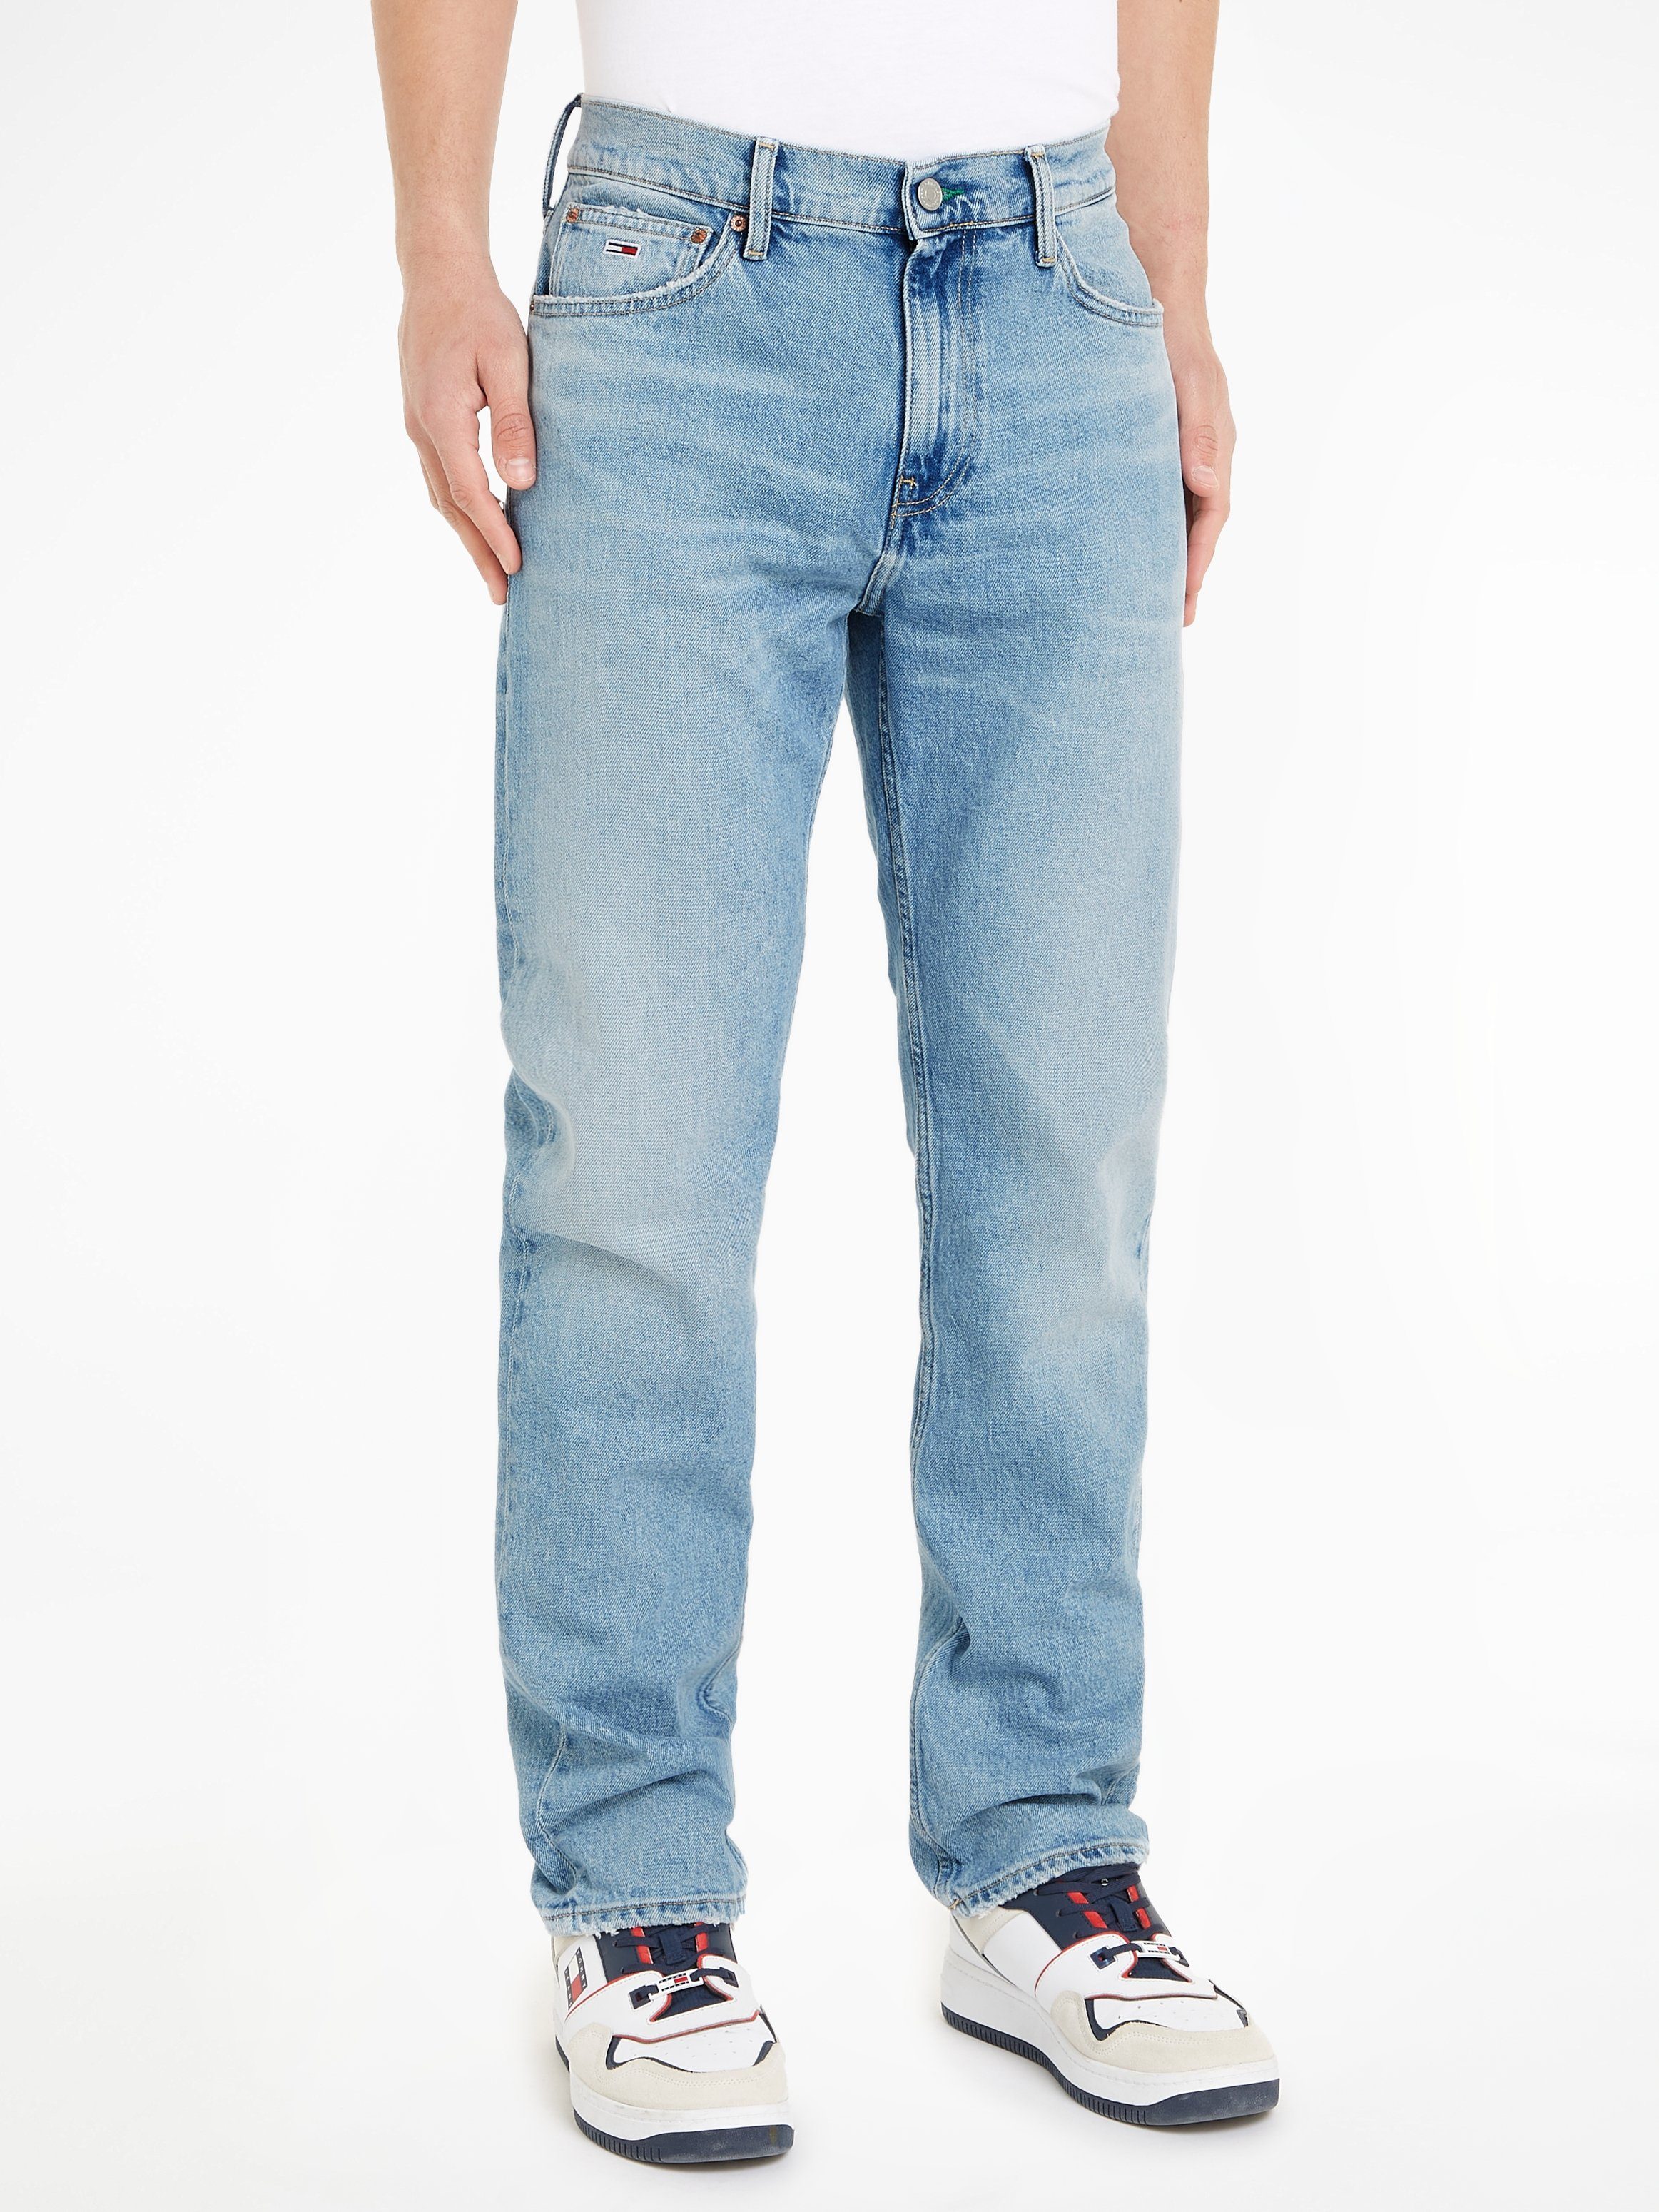 Tommy Jeans Relax-fit-Jeans ETHAN STRGHT im 5-Pocket-Style RLXD Denim Light